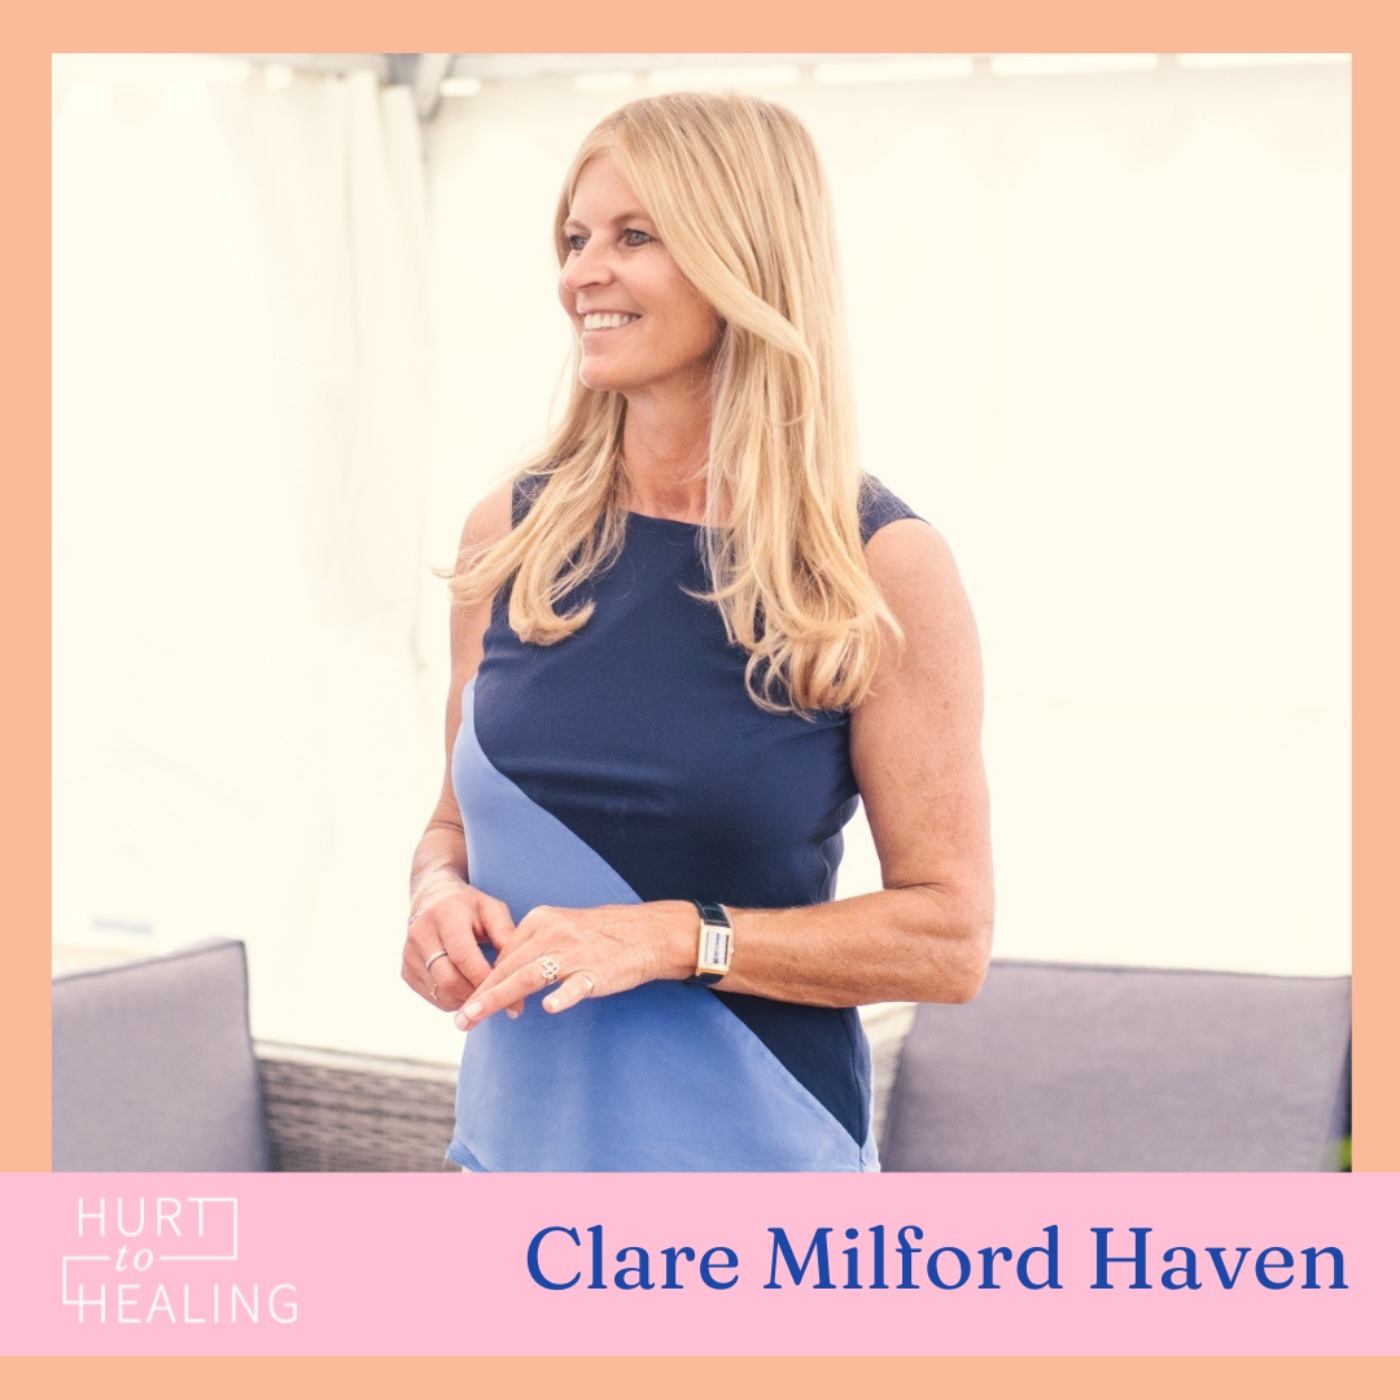 Clare Milford Haven on helping men in crisis and losing a child to suicide